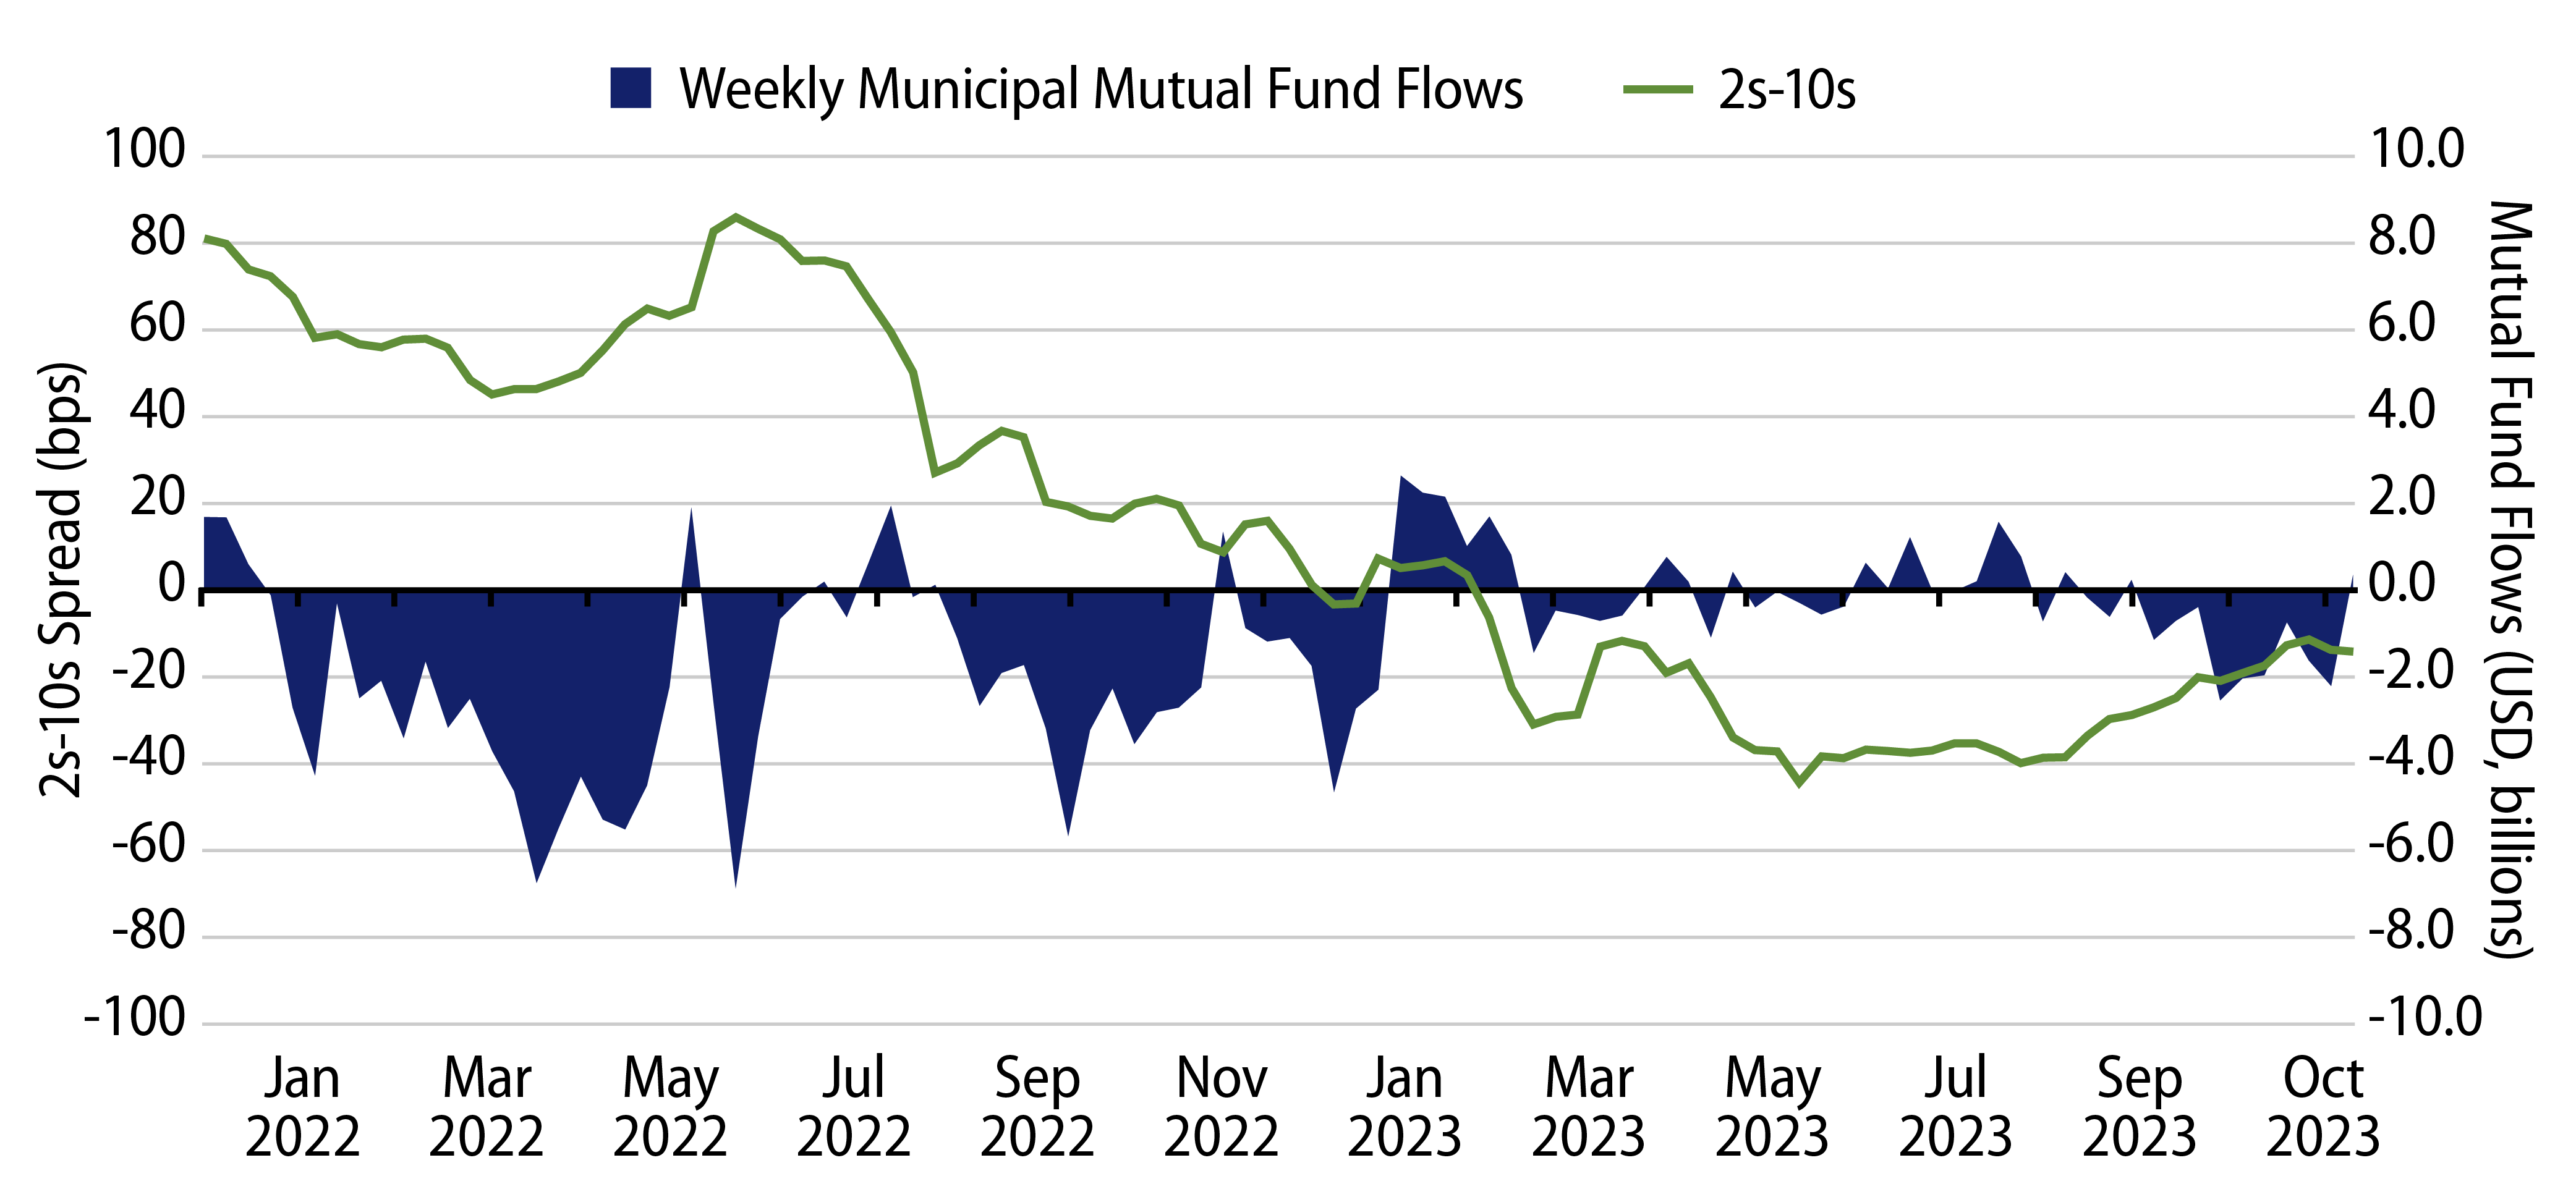 Explore Weekly Fund Flows vs. Yield Curve Steepness